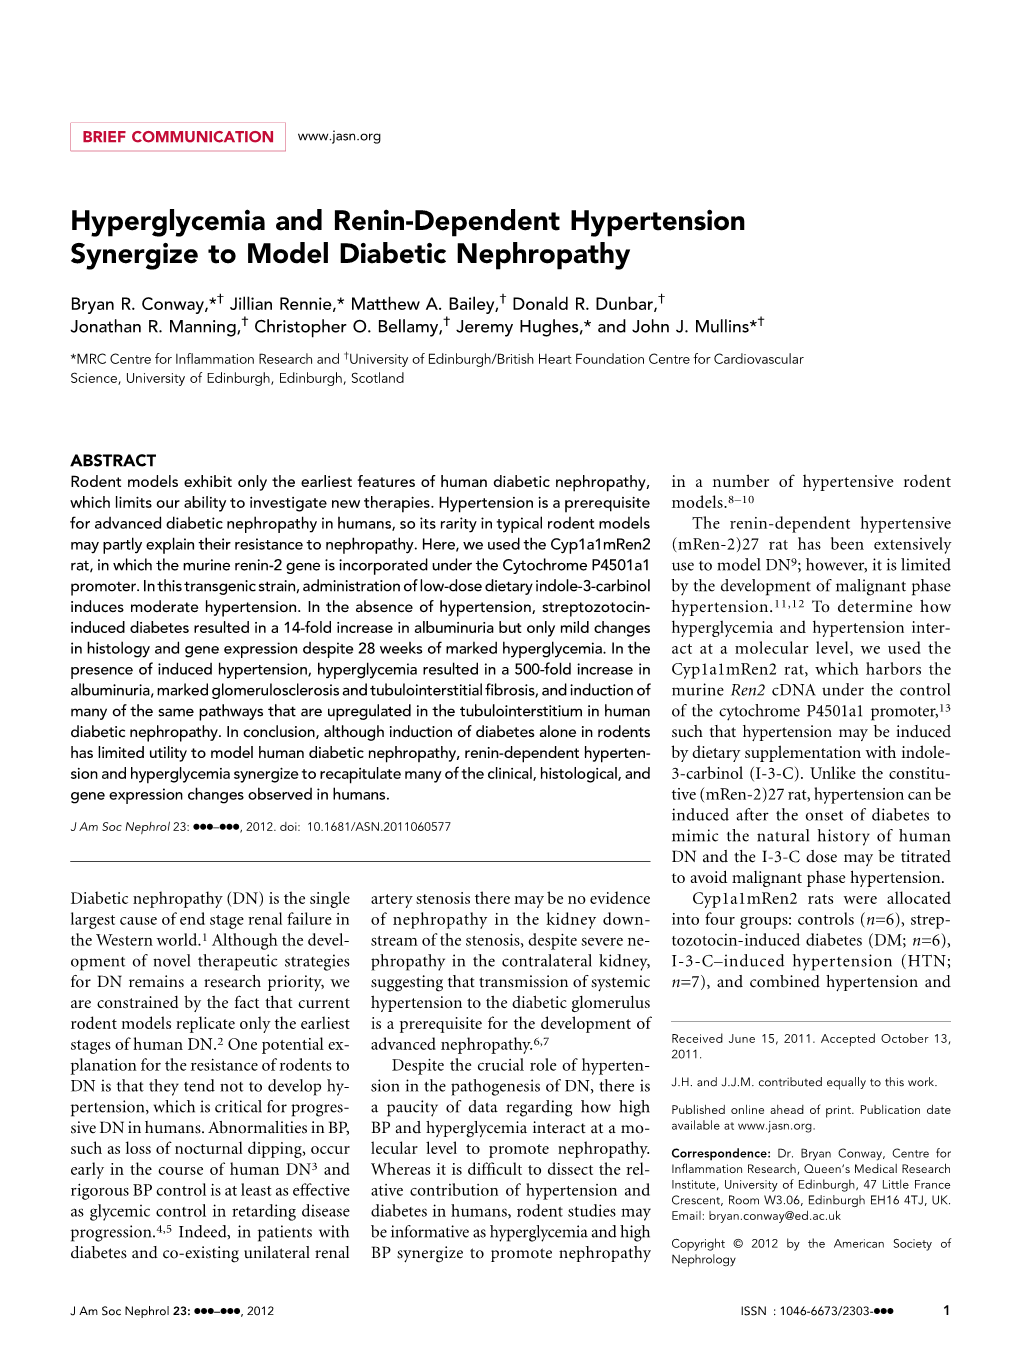 Hyperglycemia and Renin-Dependent Hypertension Synergize to Model Diabetic Nephropathy